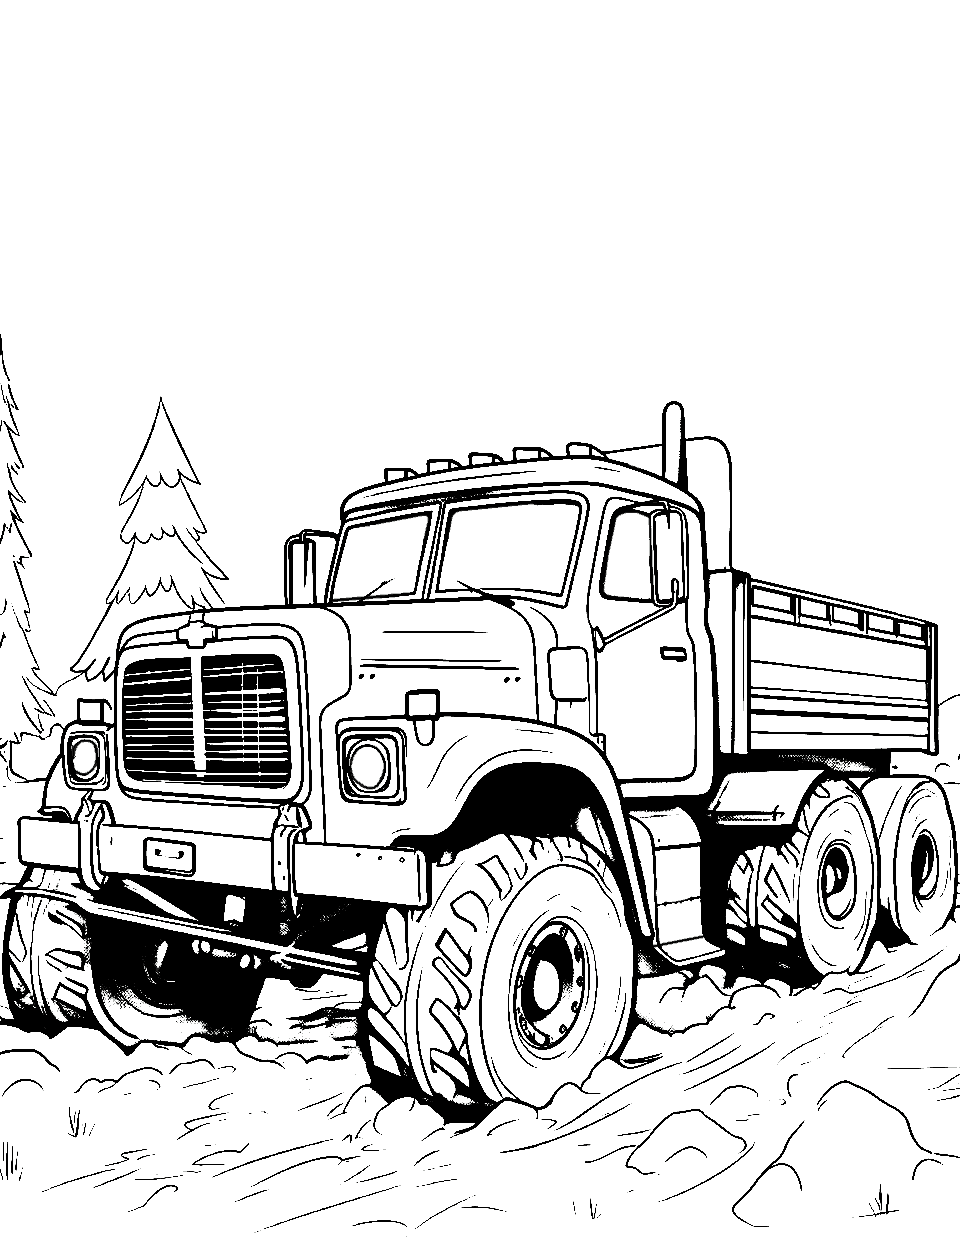 Truck in the Mud Coloring Page - A bold truck splashing through a massive mud puddle, with mud flying.